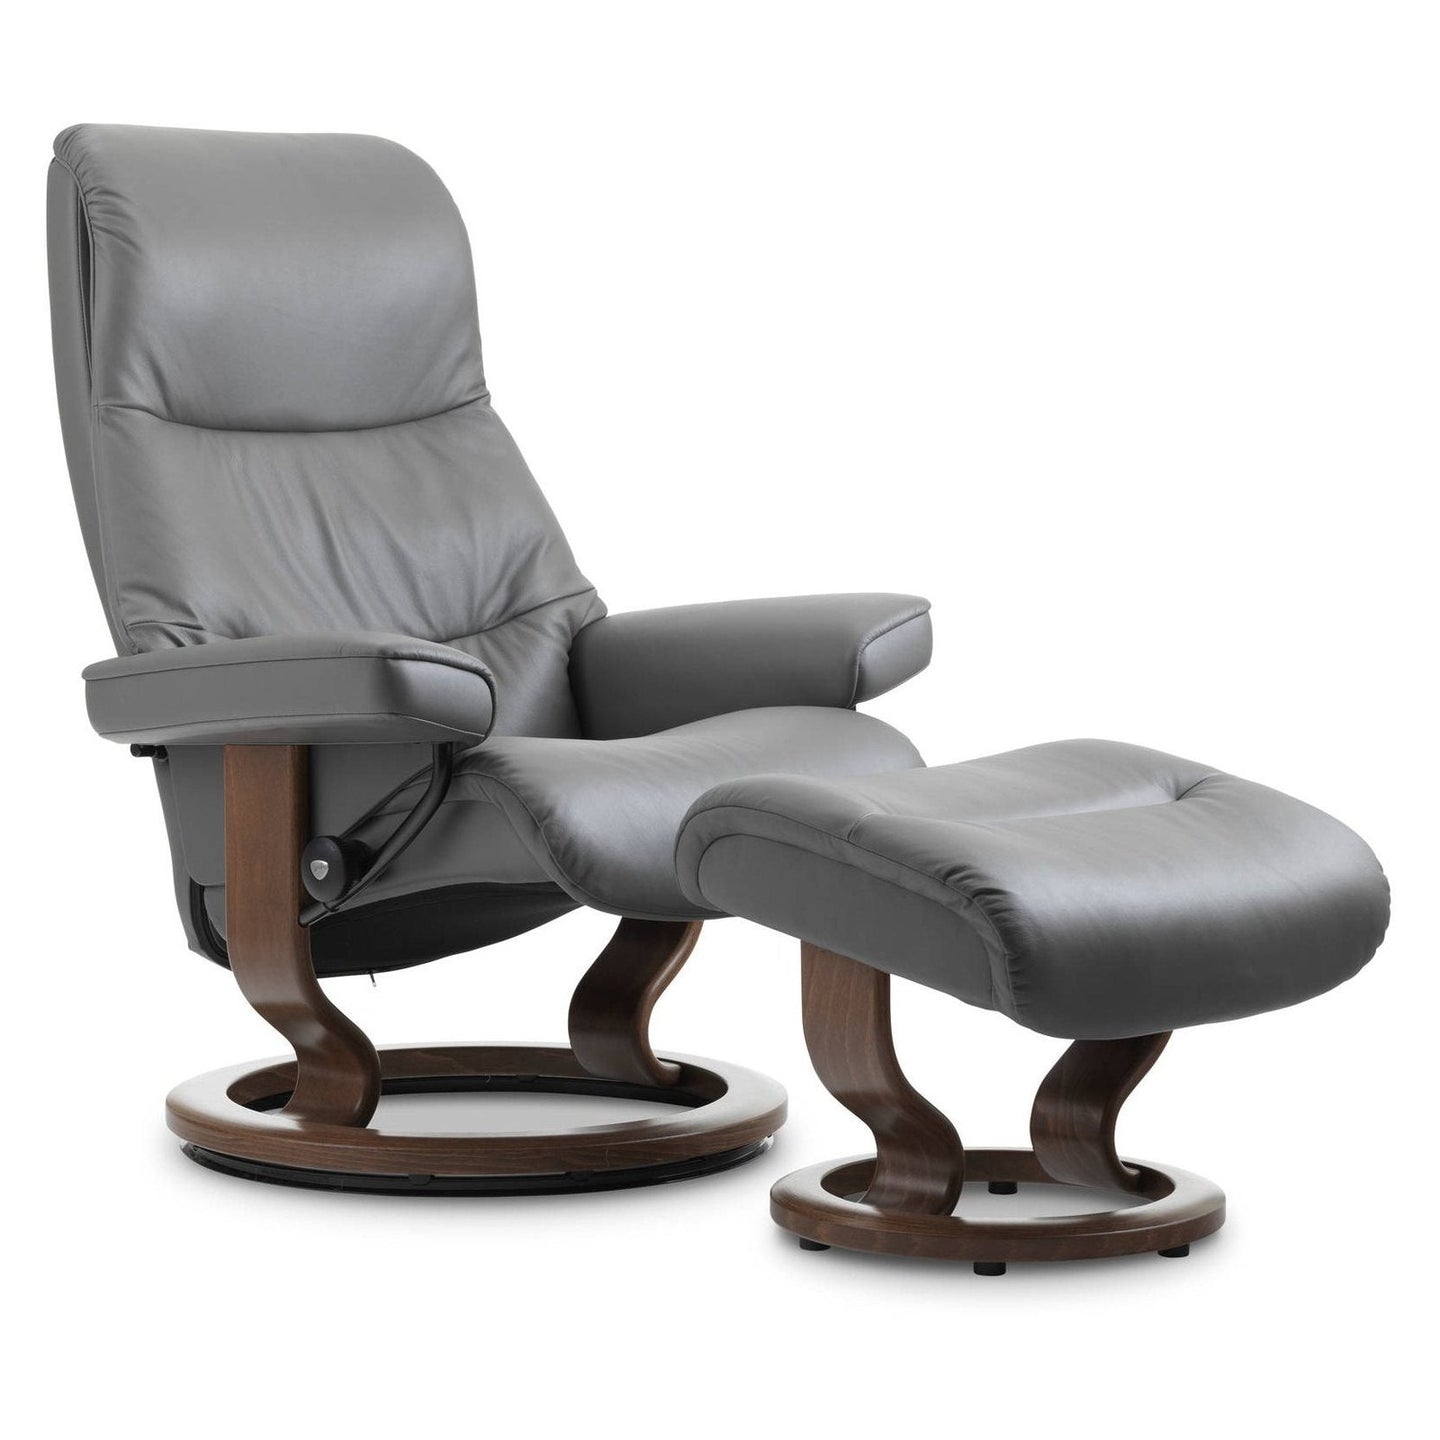 Stressless View Large Recliner with Footstool